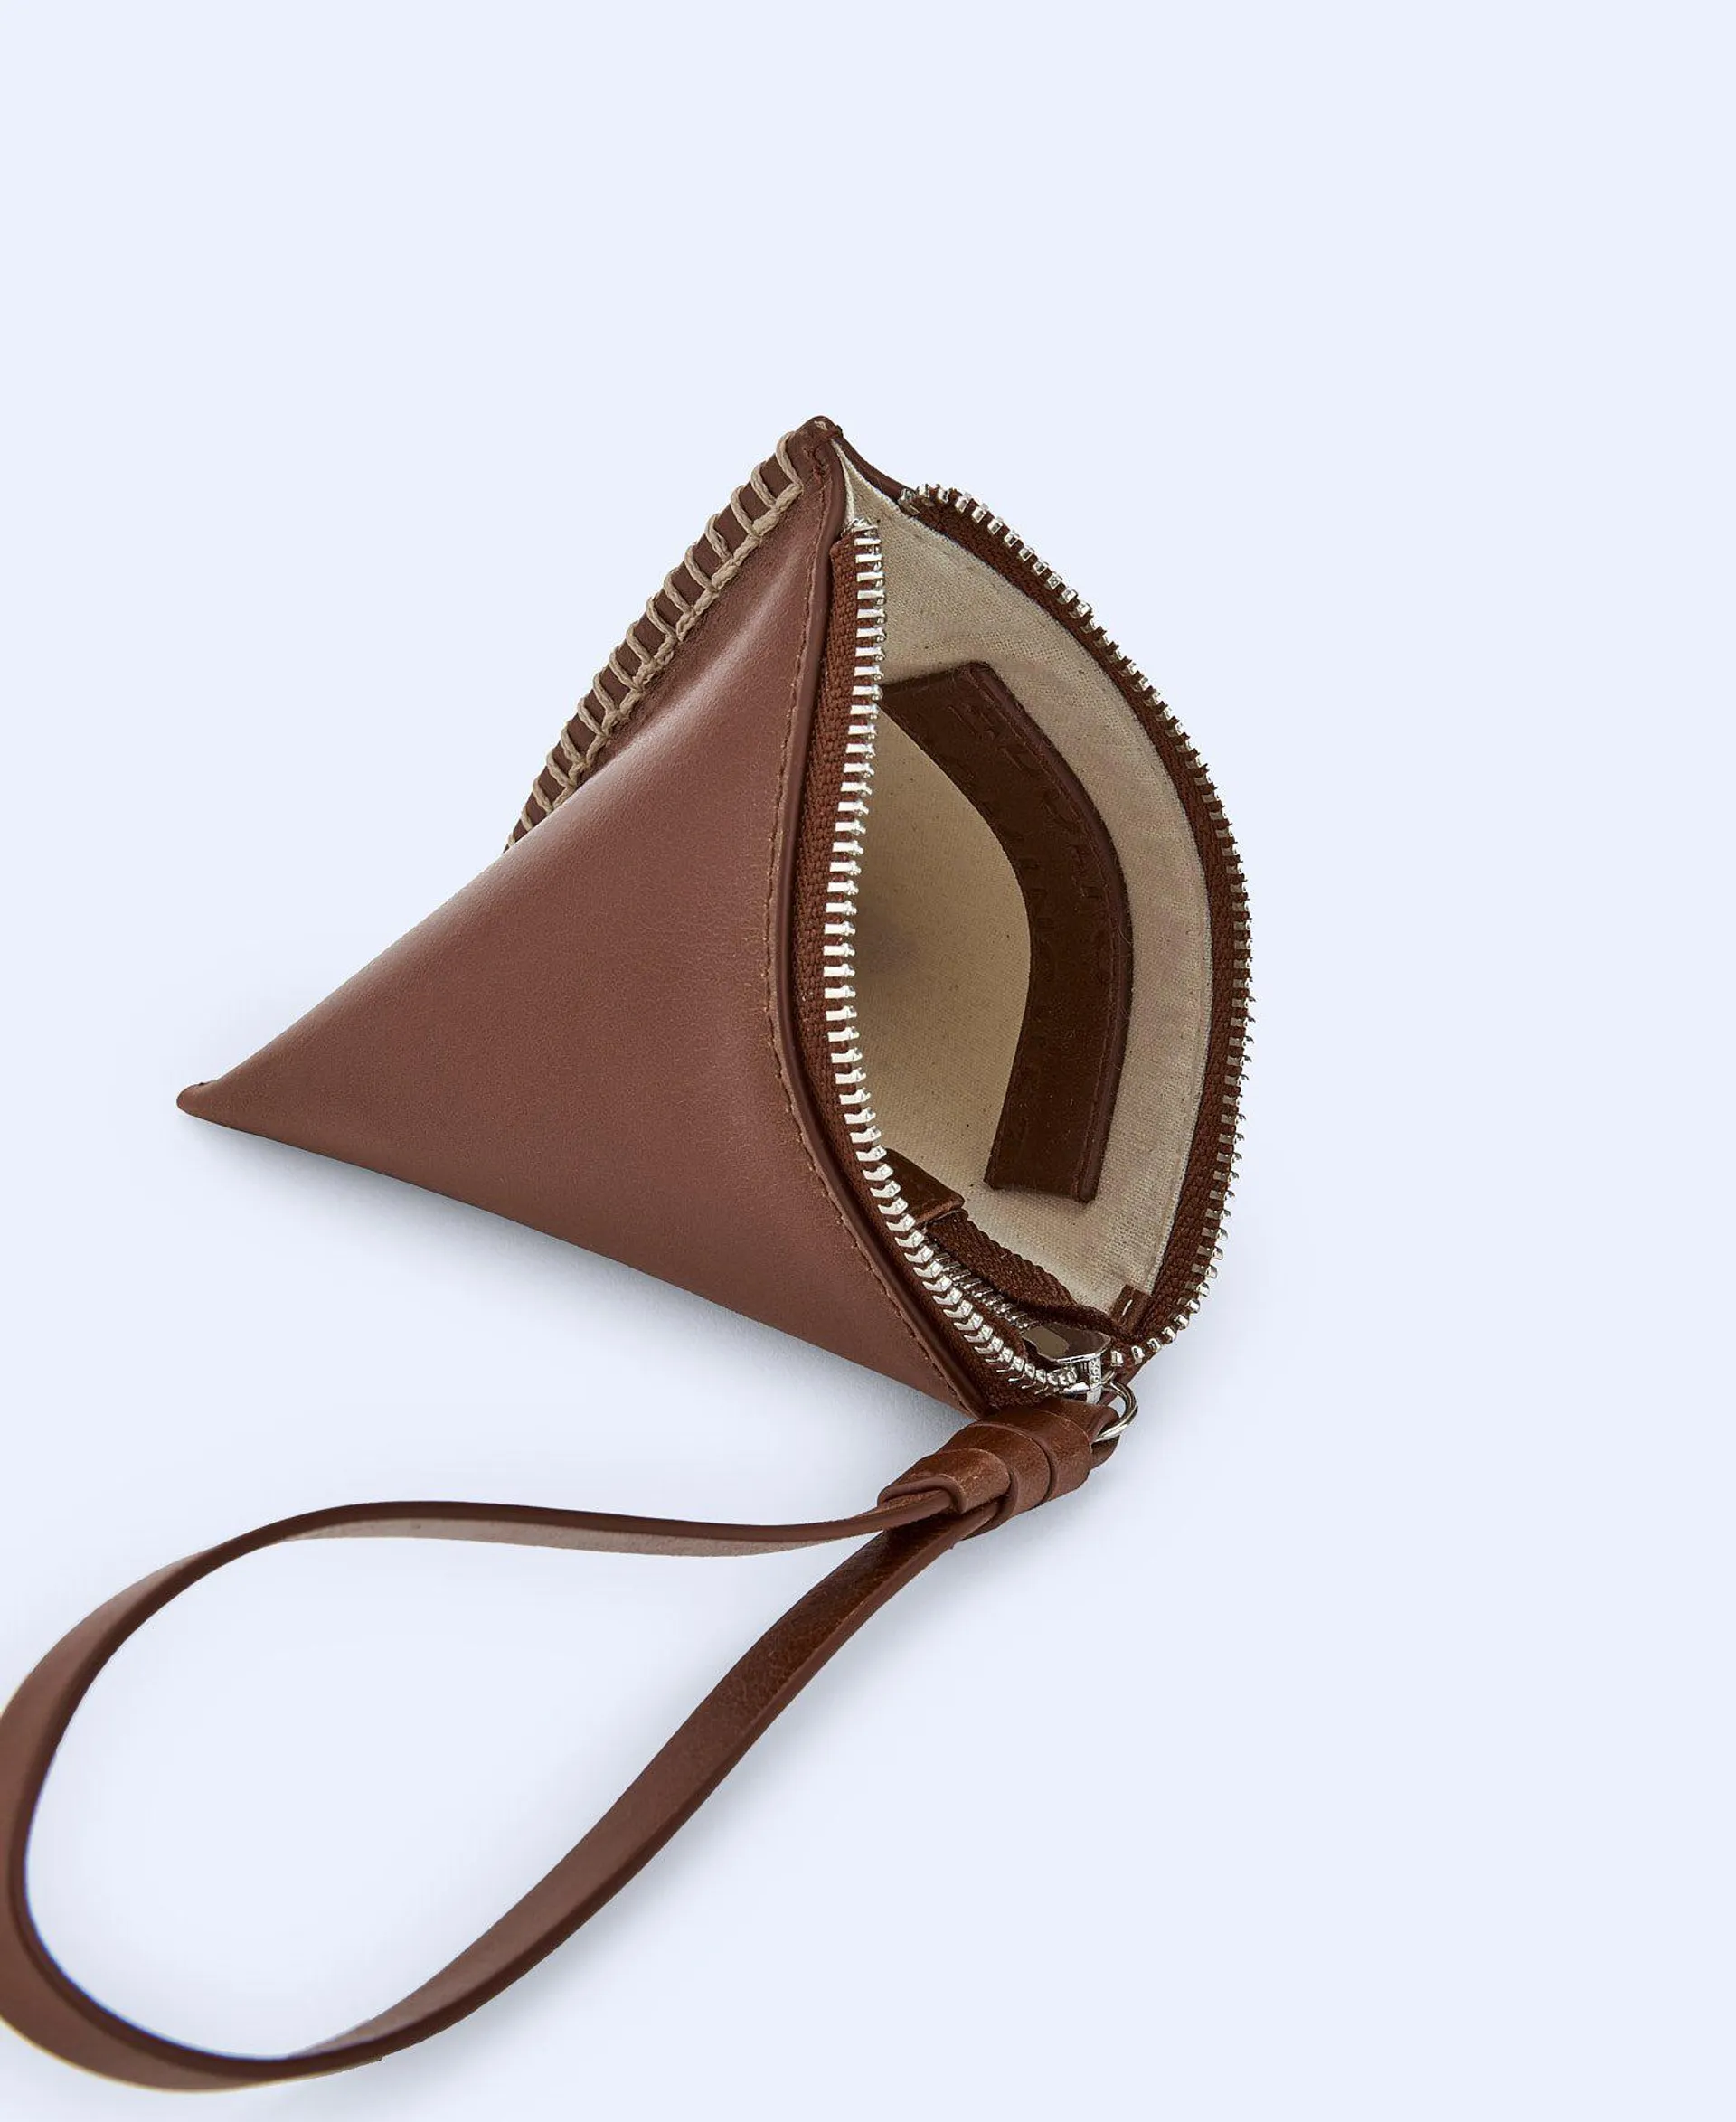 Leather purse with maxi handle